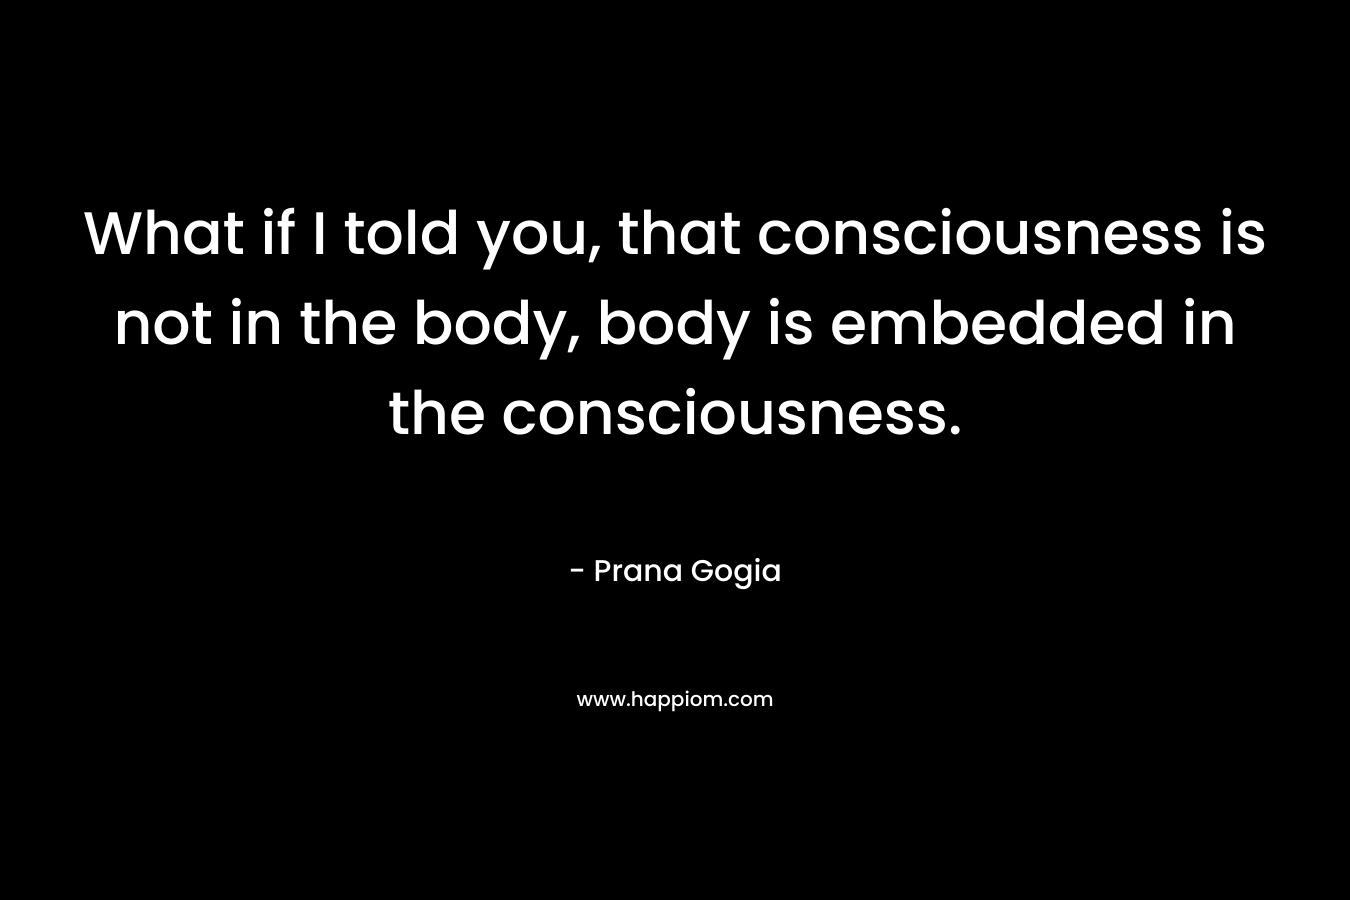 What if I told you, that consciousness is not in the body, body is embedded in the consciousness. – Prana Gogia